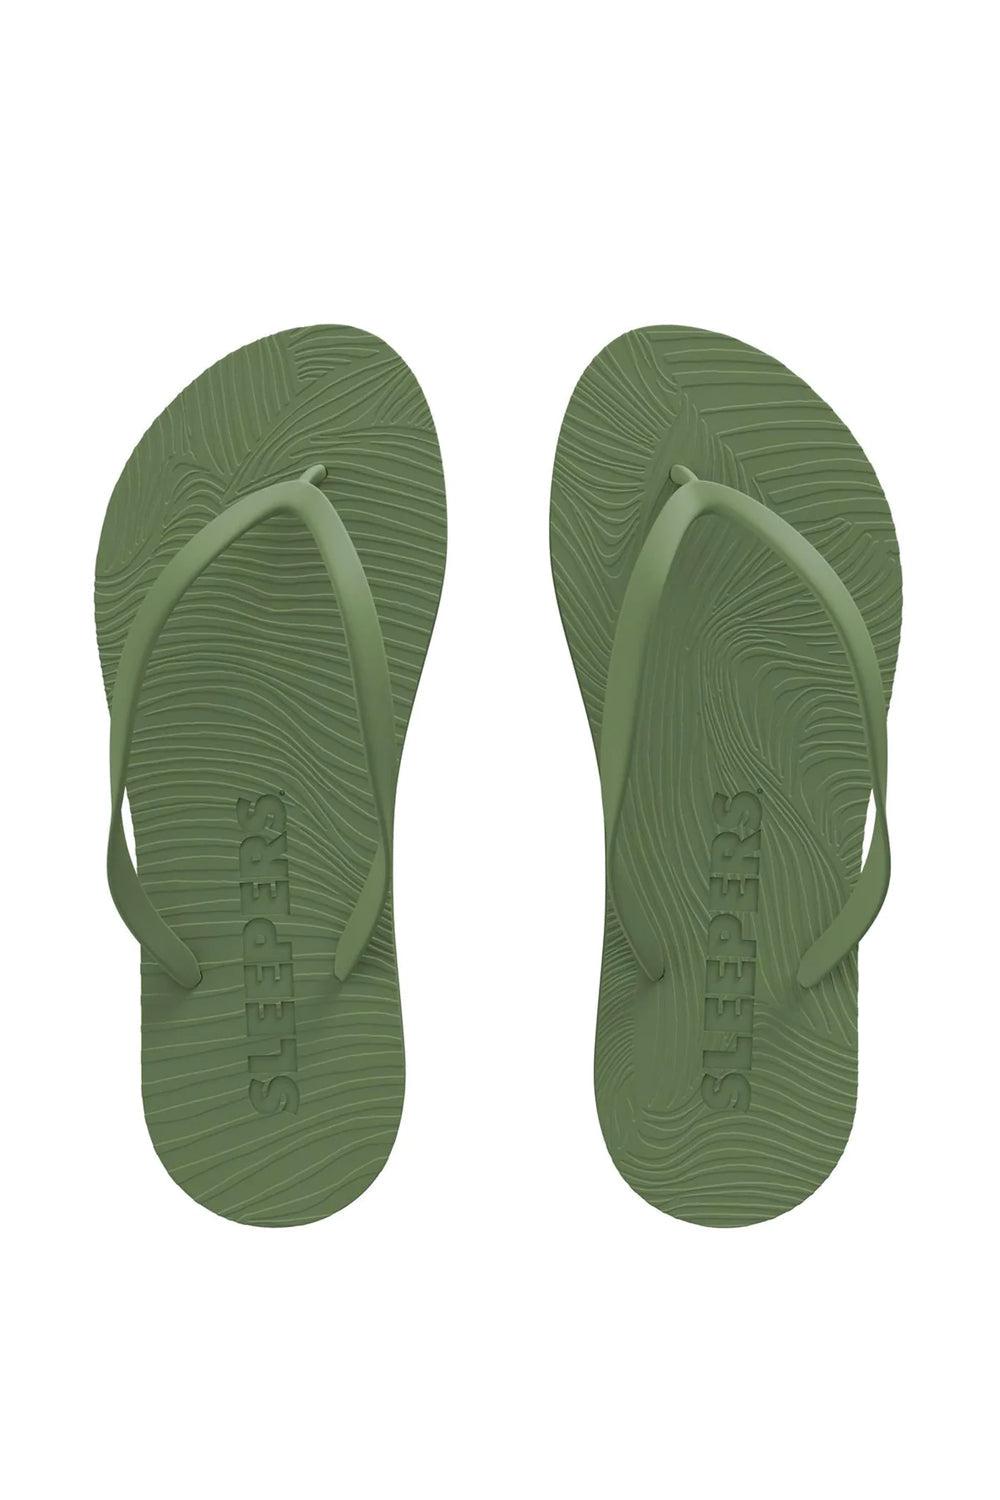 Sleepers Slim Natural Rubber